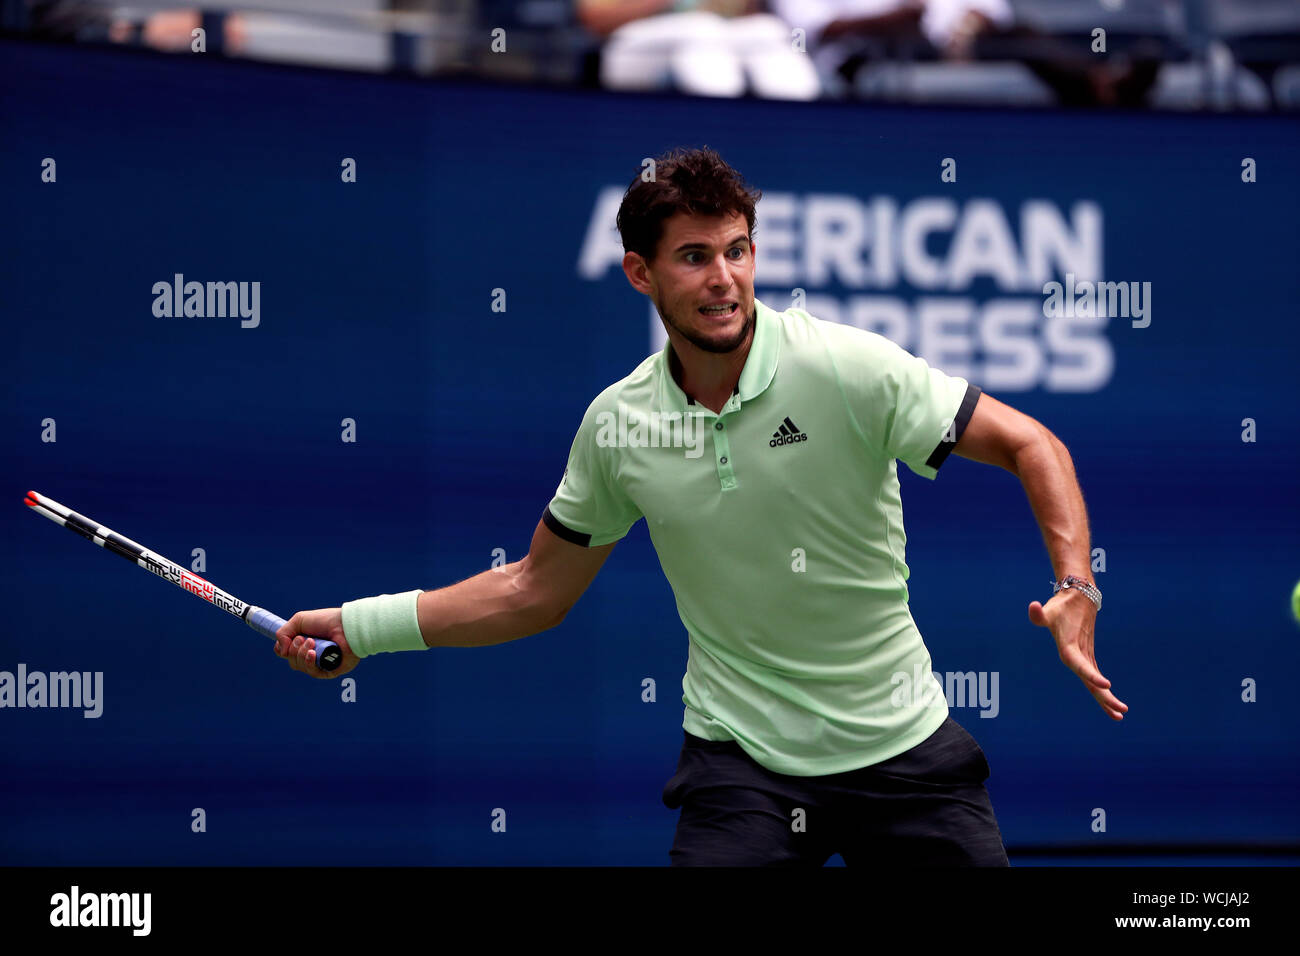 Flushing Meadows, New York, United States - 27 August 2019. Dominic Thiem of Austria sets up a return to Thomas Fabbiano Italy during their first round match at the US Open in Flushing Meadows, New York. Fabiano won the match in four sets. Credit: Adam Stoltman/Alamy Live News Stock Photo